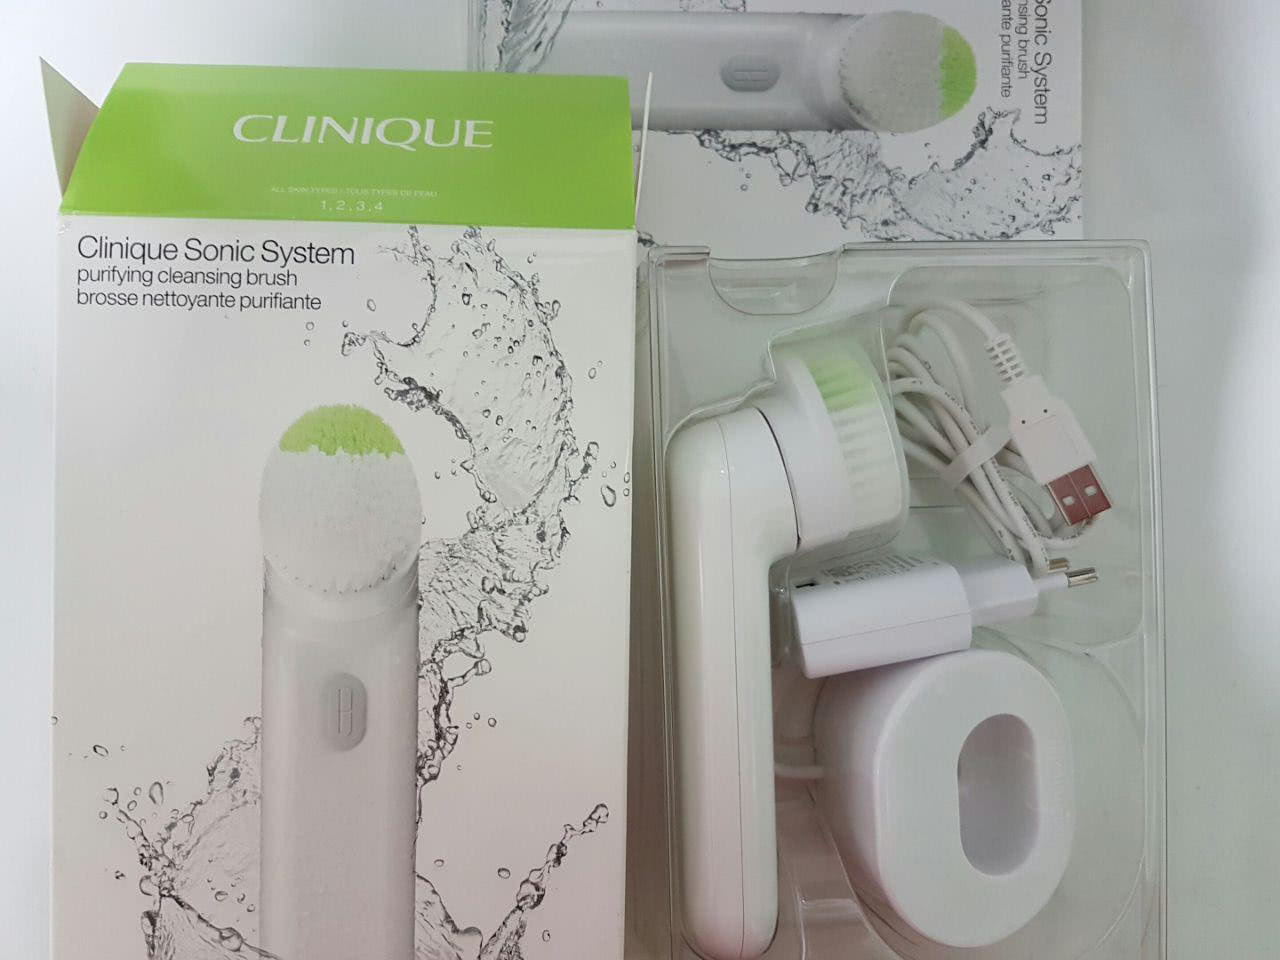 Clinique Sonic System